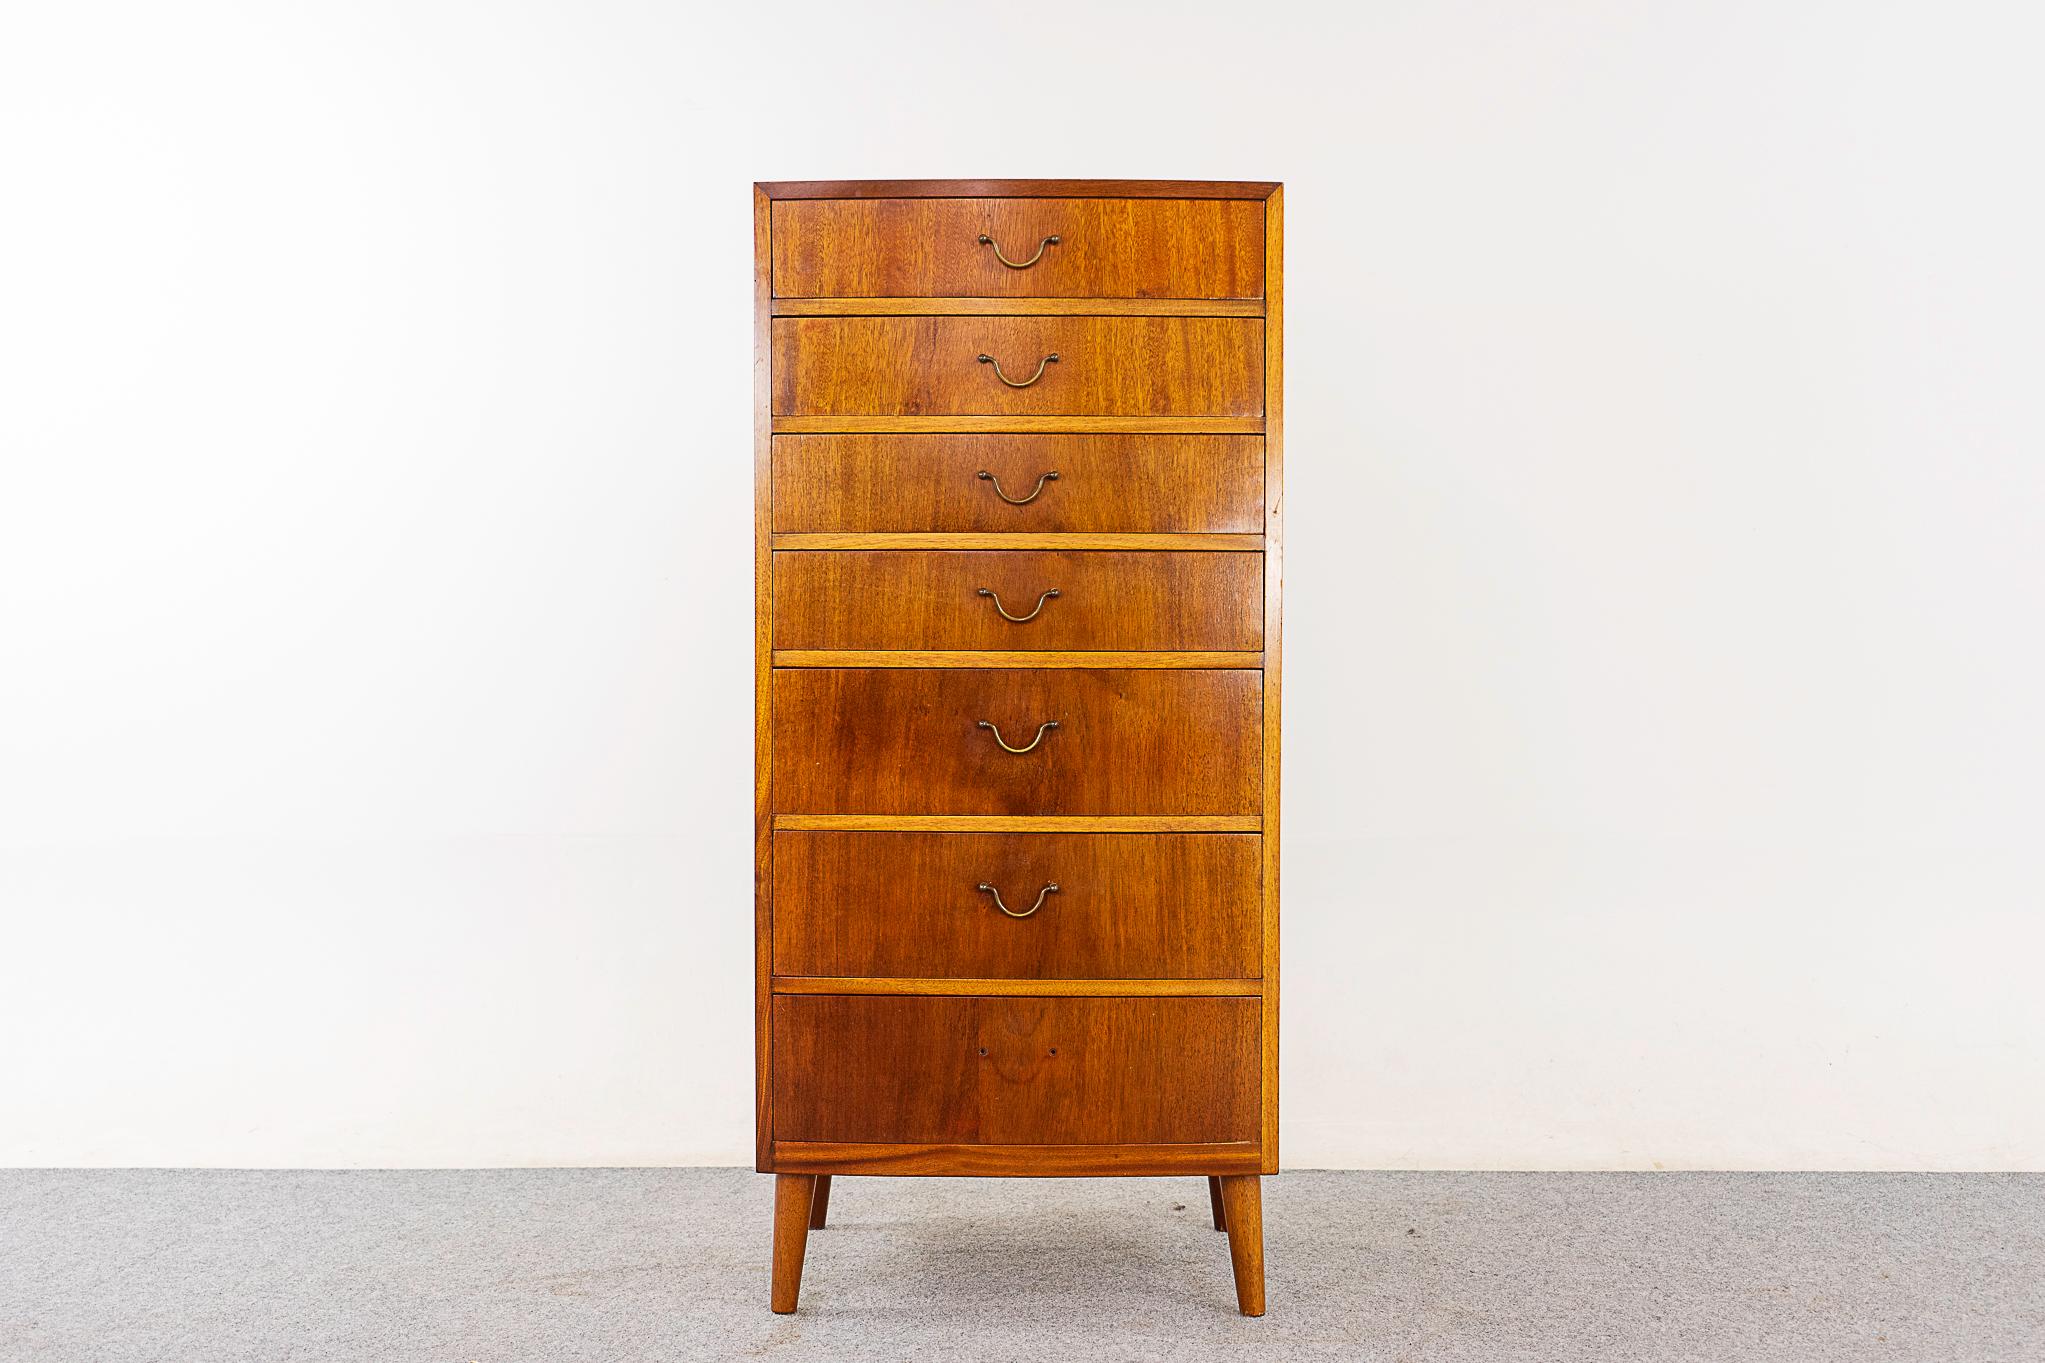 Mahogany Swedish dresser, circa 1950's. Slim proportions with solid wood edging and stunning book-matched veneer. Drawer faces have lovely grain patterns and dovetail construction. Darling metal finger pulls!

Unrestored item with option to purchase